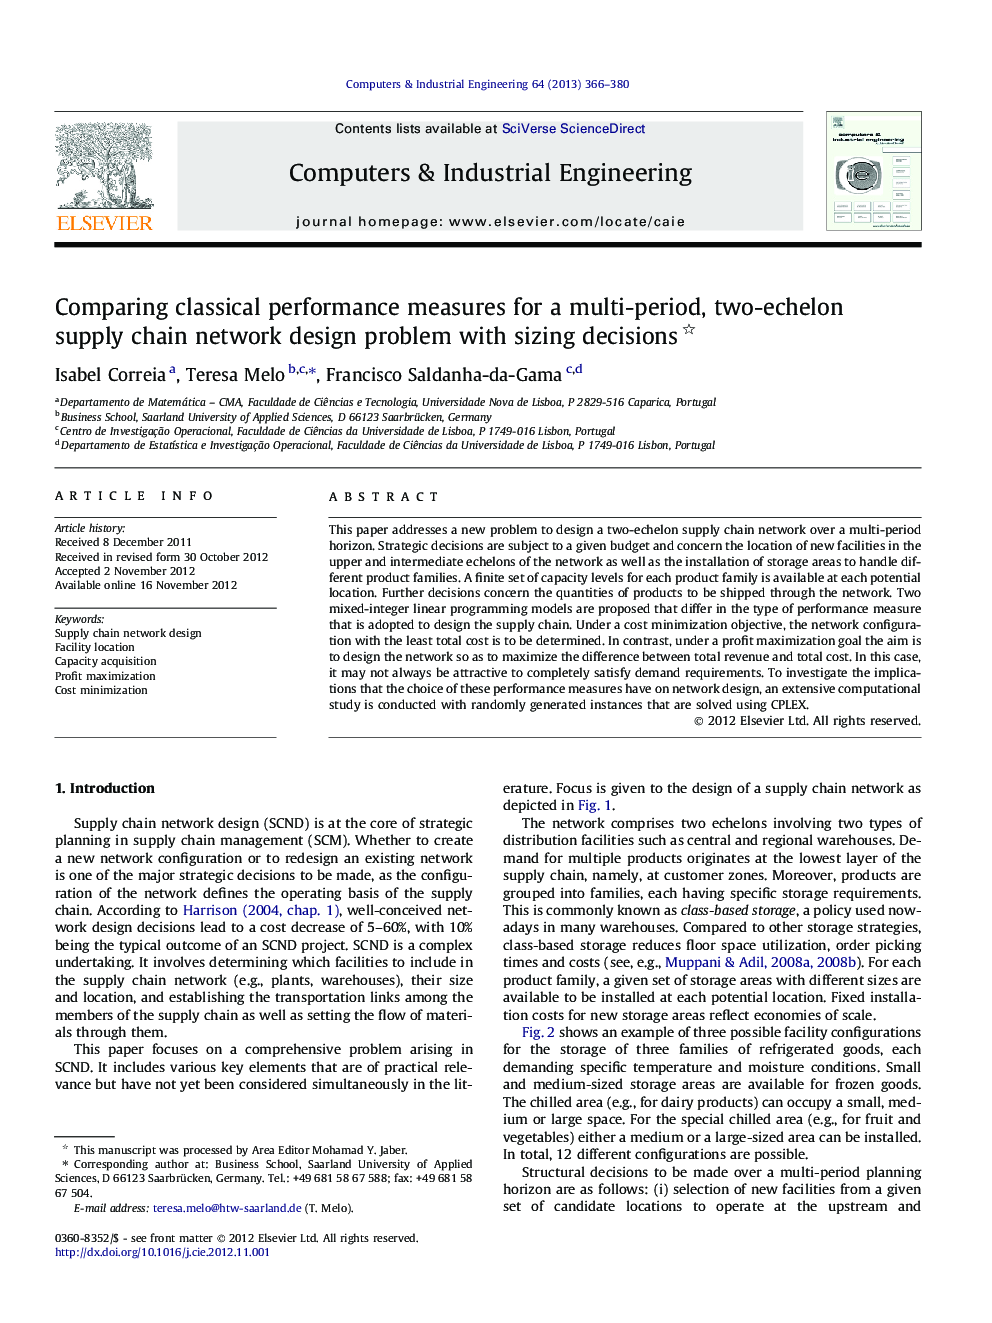 Comparing classical performance measures for a multi-period, two-echelon supply chain network design problem with sizing decisions 